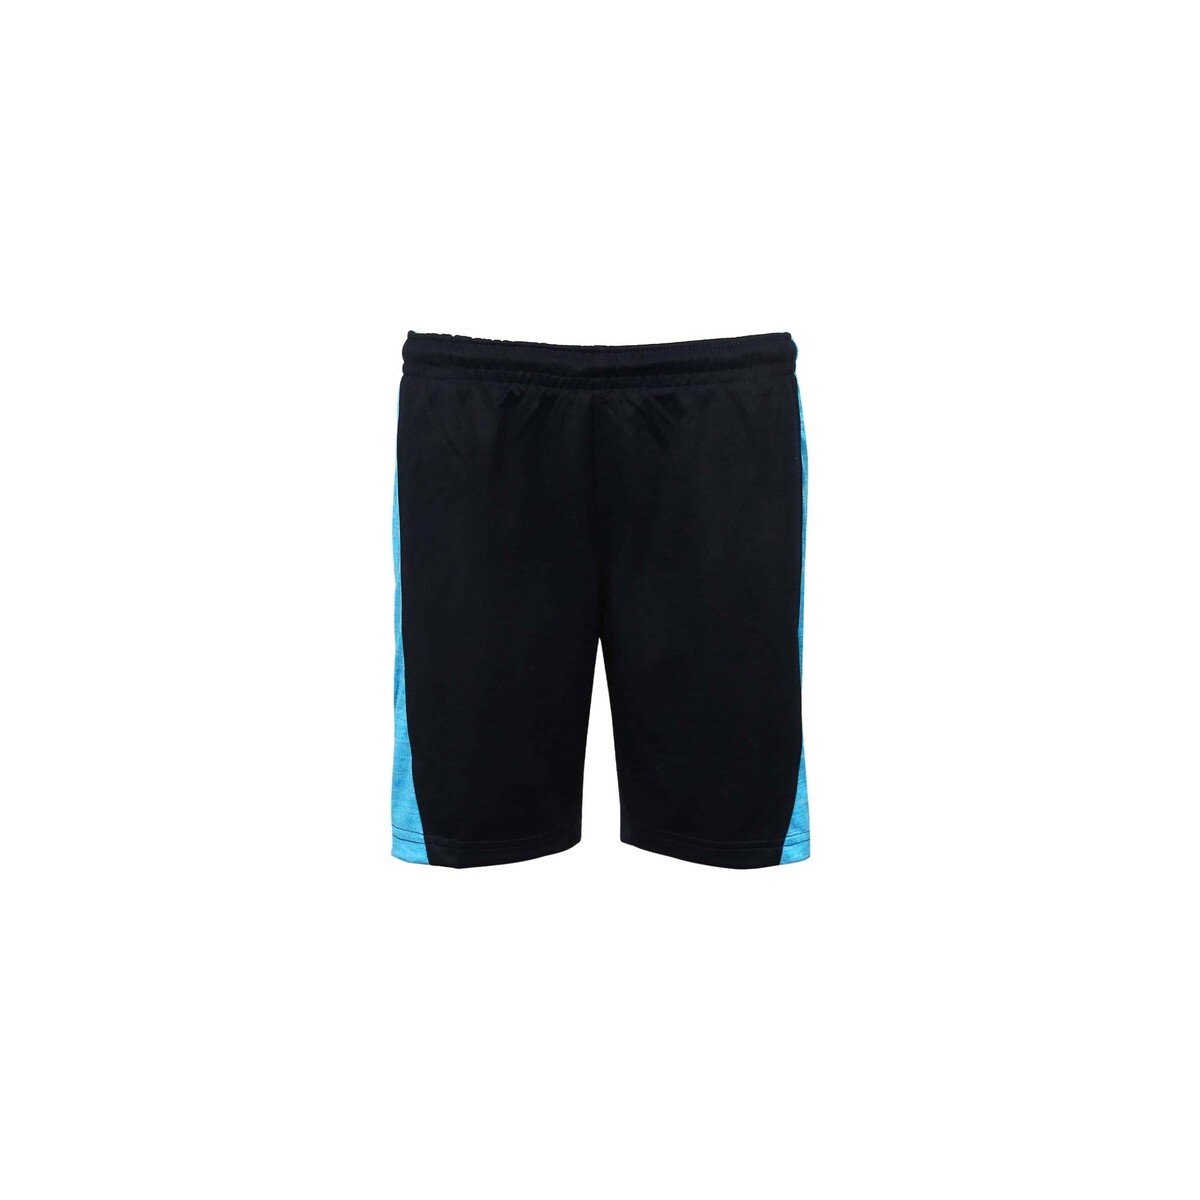 Black Panther Boy's Active Shorts 87011D Navy, 13-14Y Online at Best ...